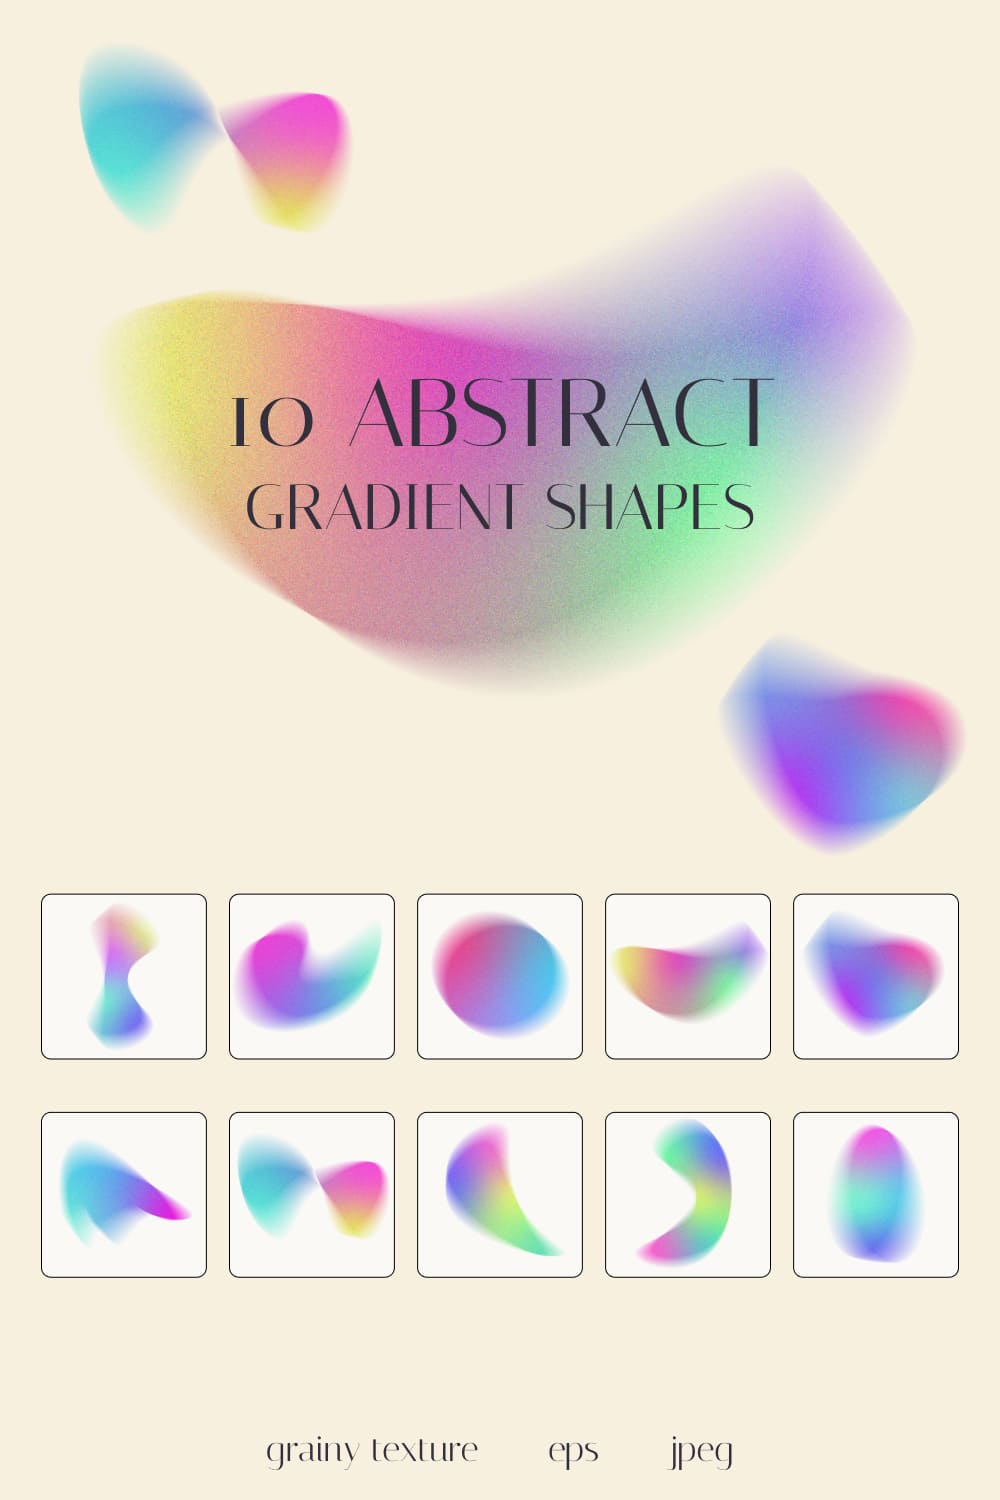 Abstract Gradient Shapes Vector pinterest image.